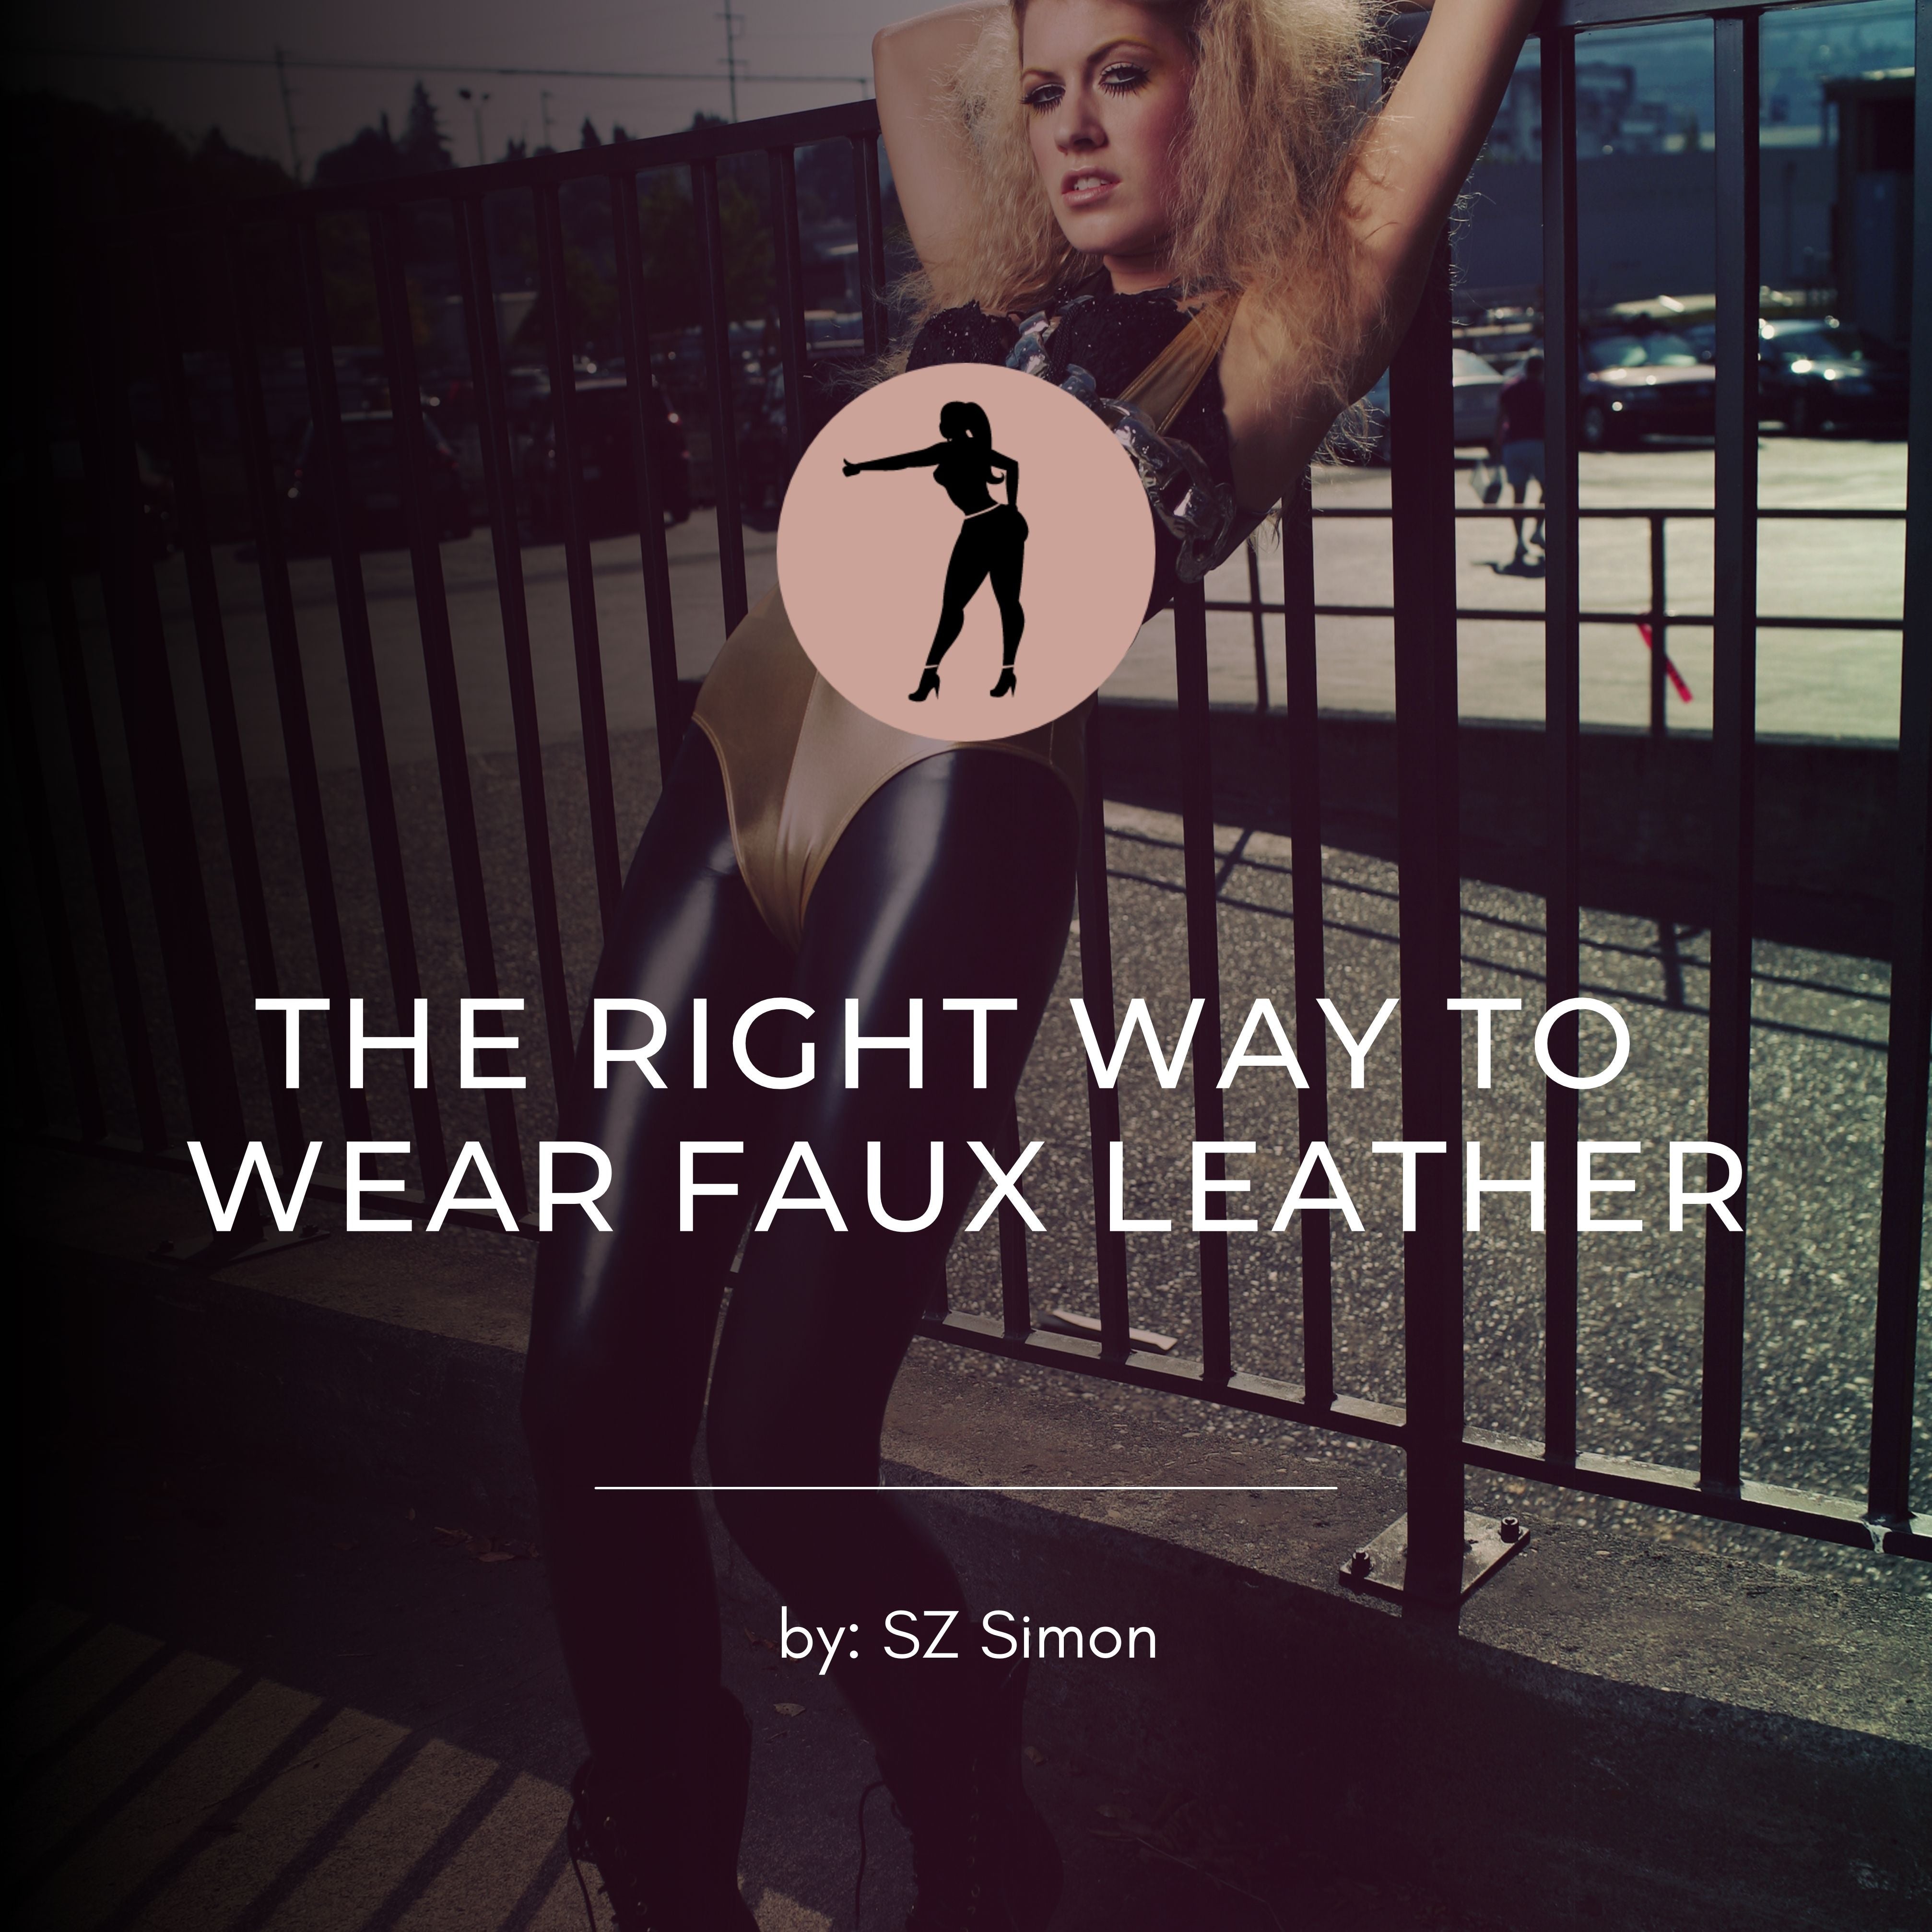 The Right Way to Wear Faux Leather